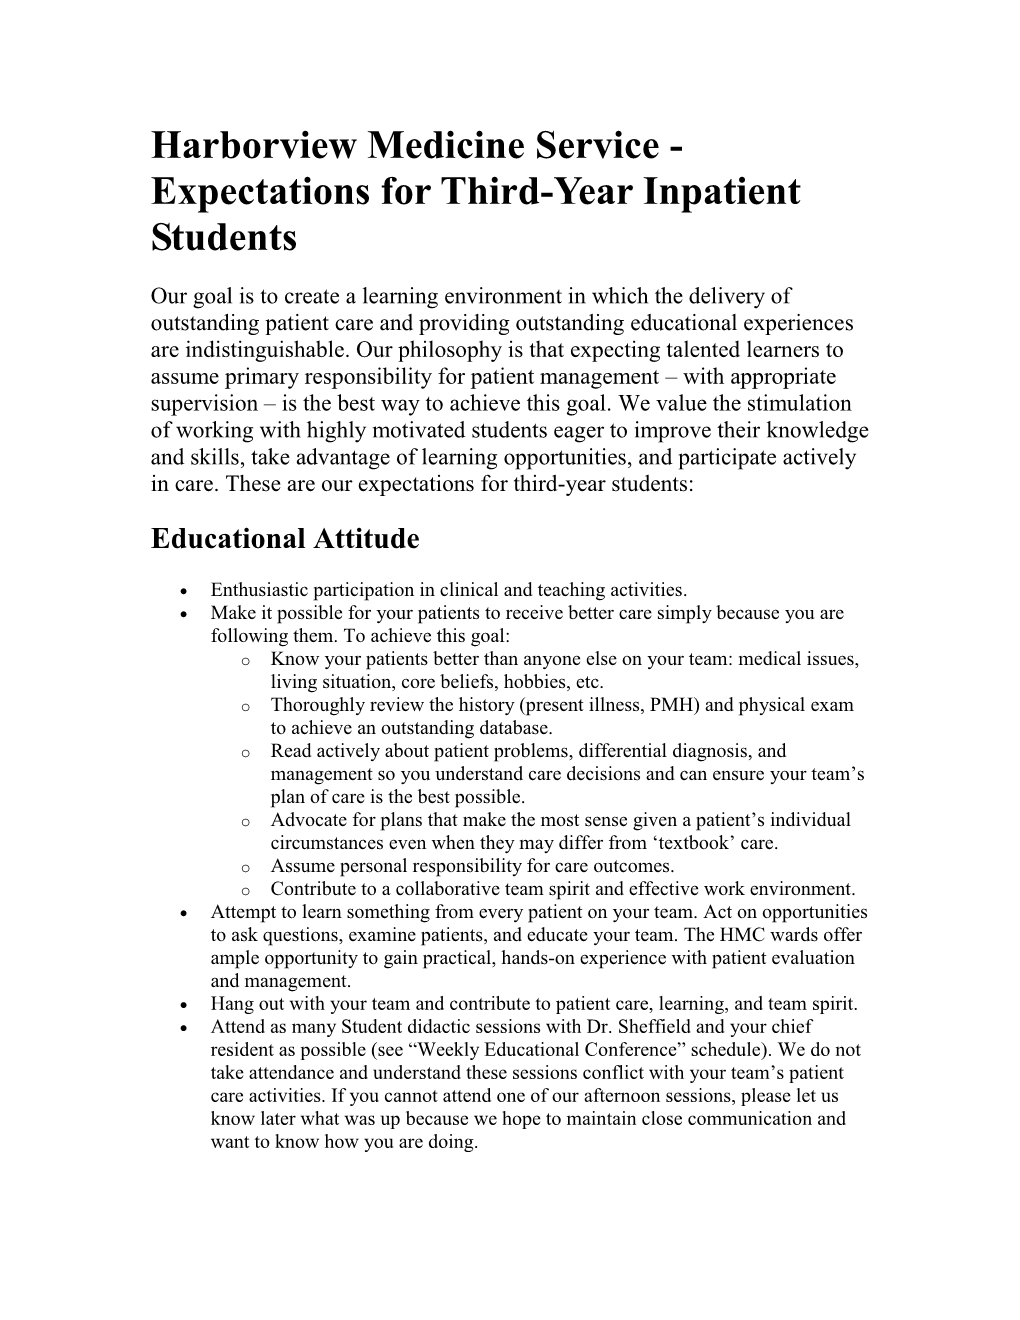 Harborview Medicine Expectations for Ward Students